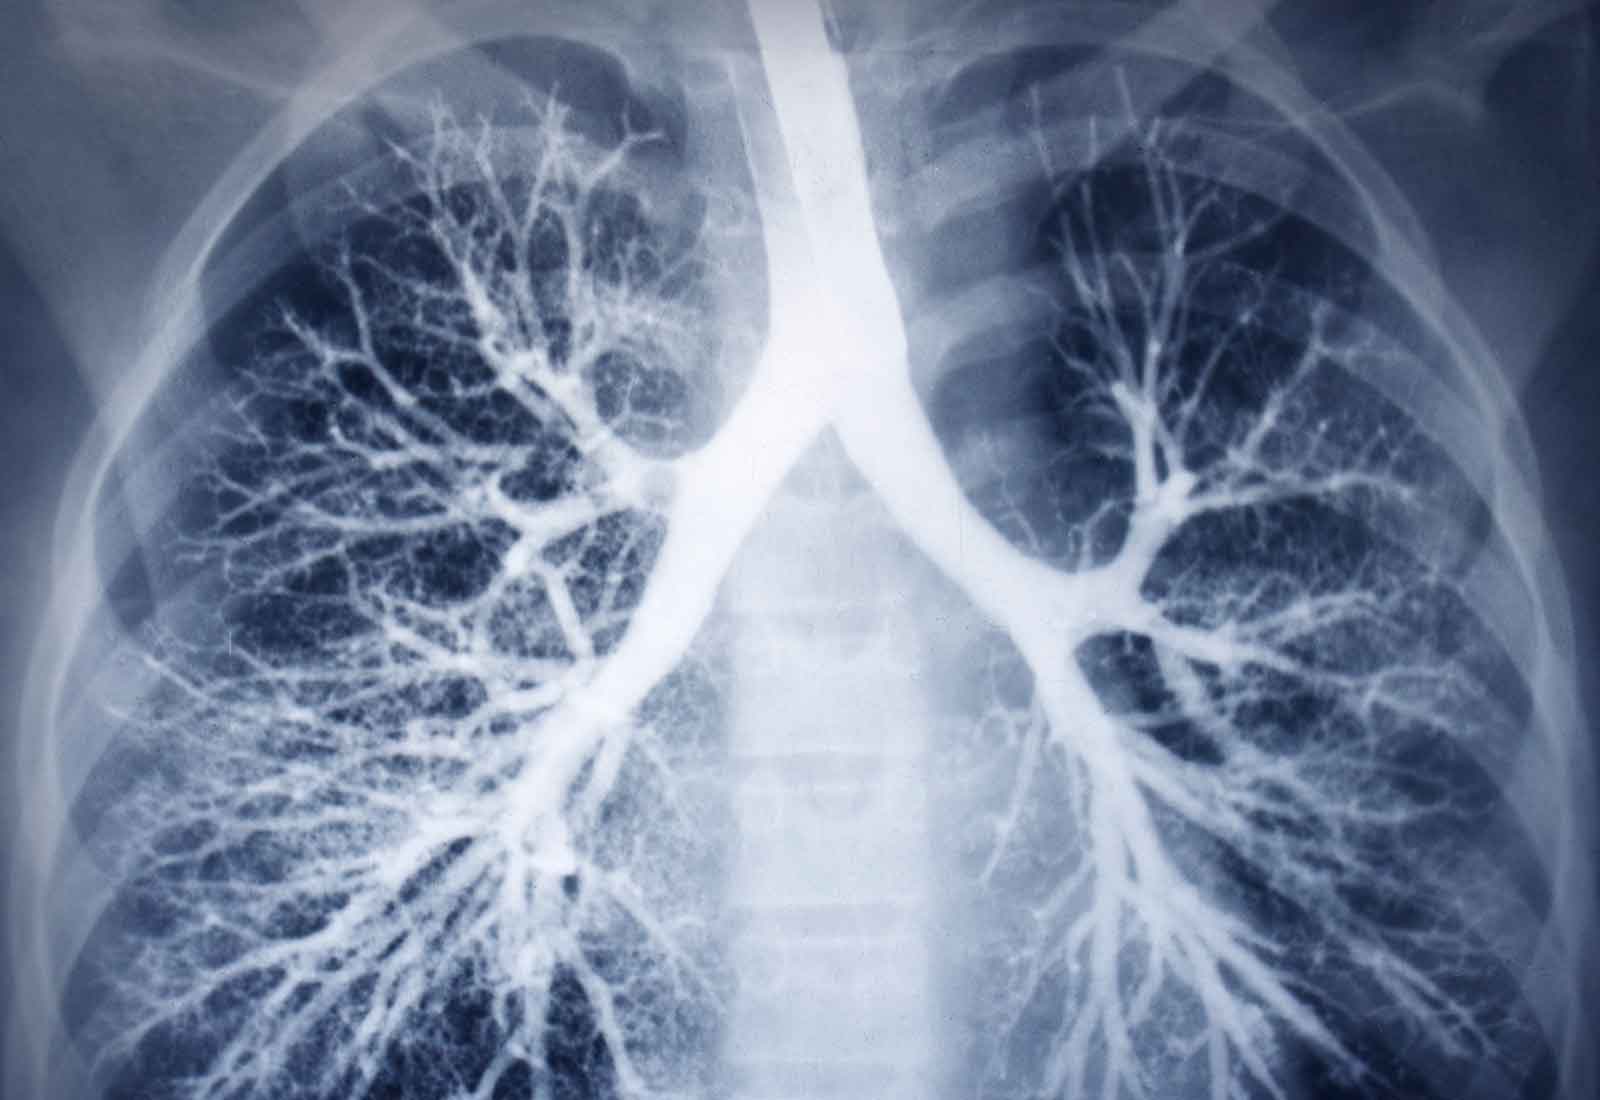 Lung Cancer Research Projects